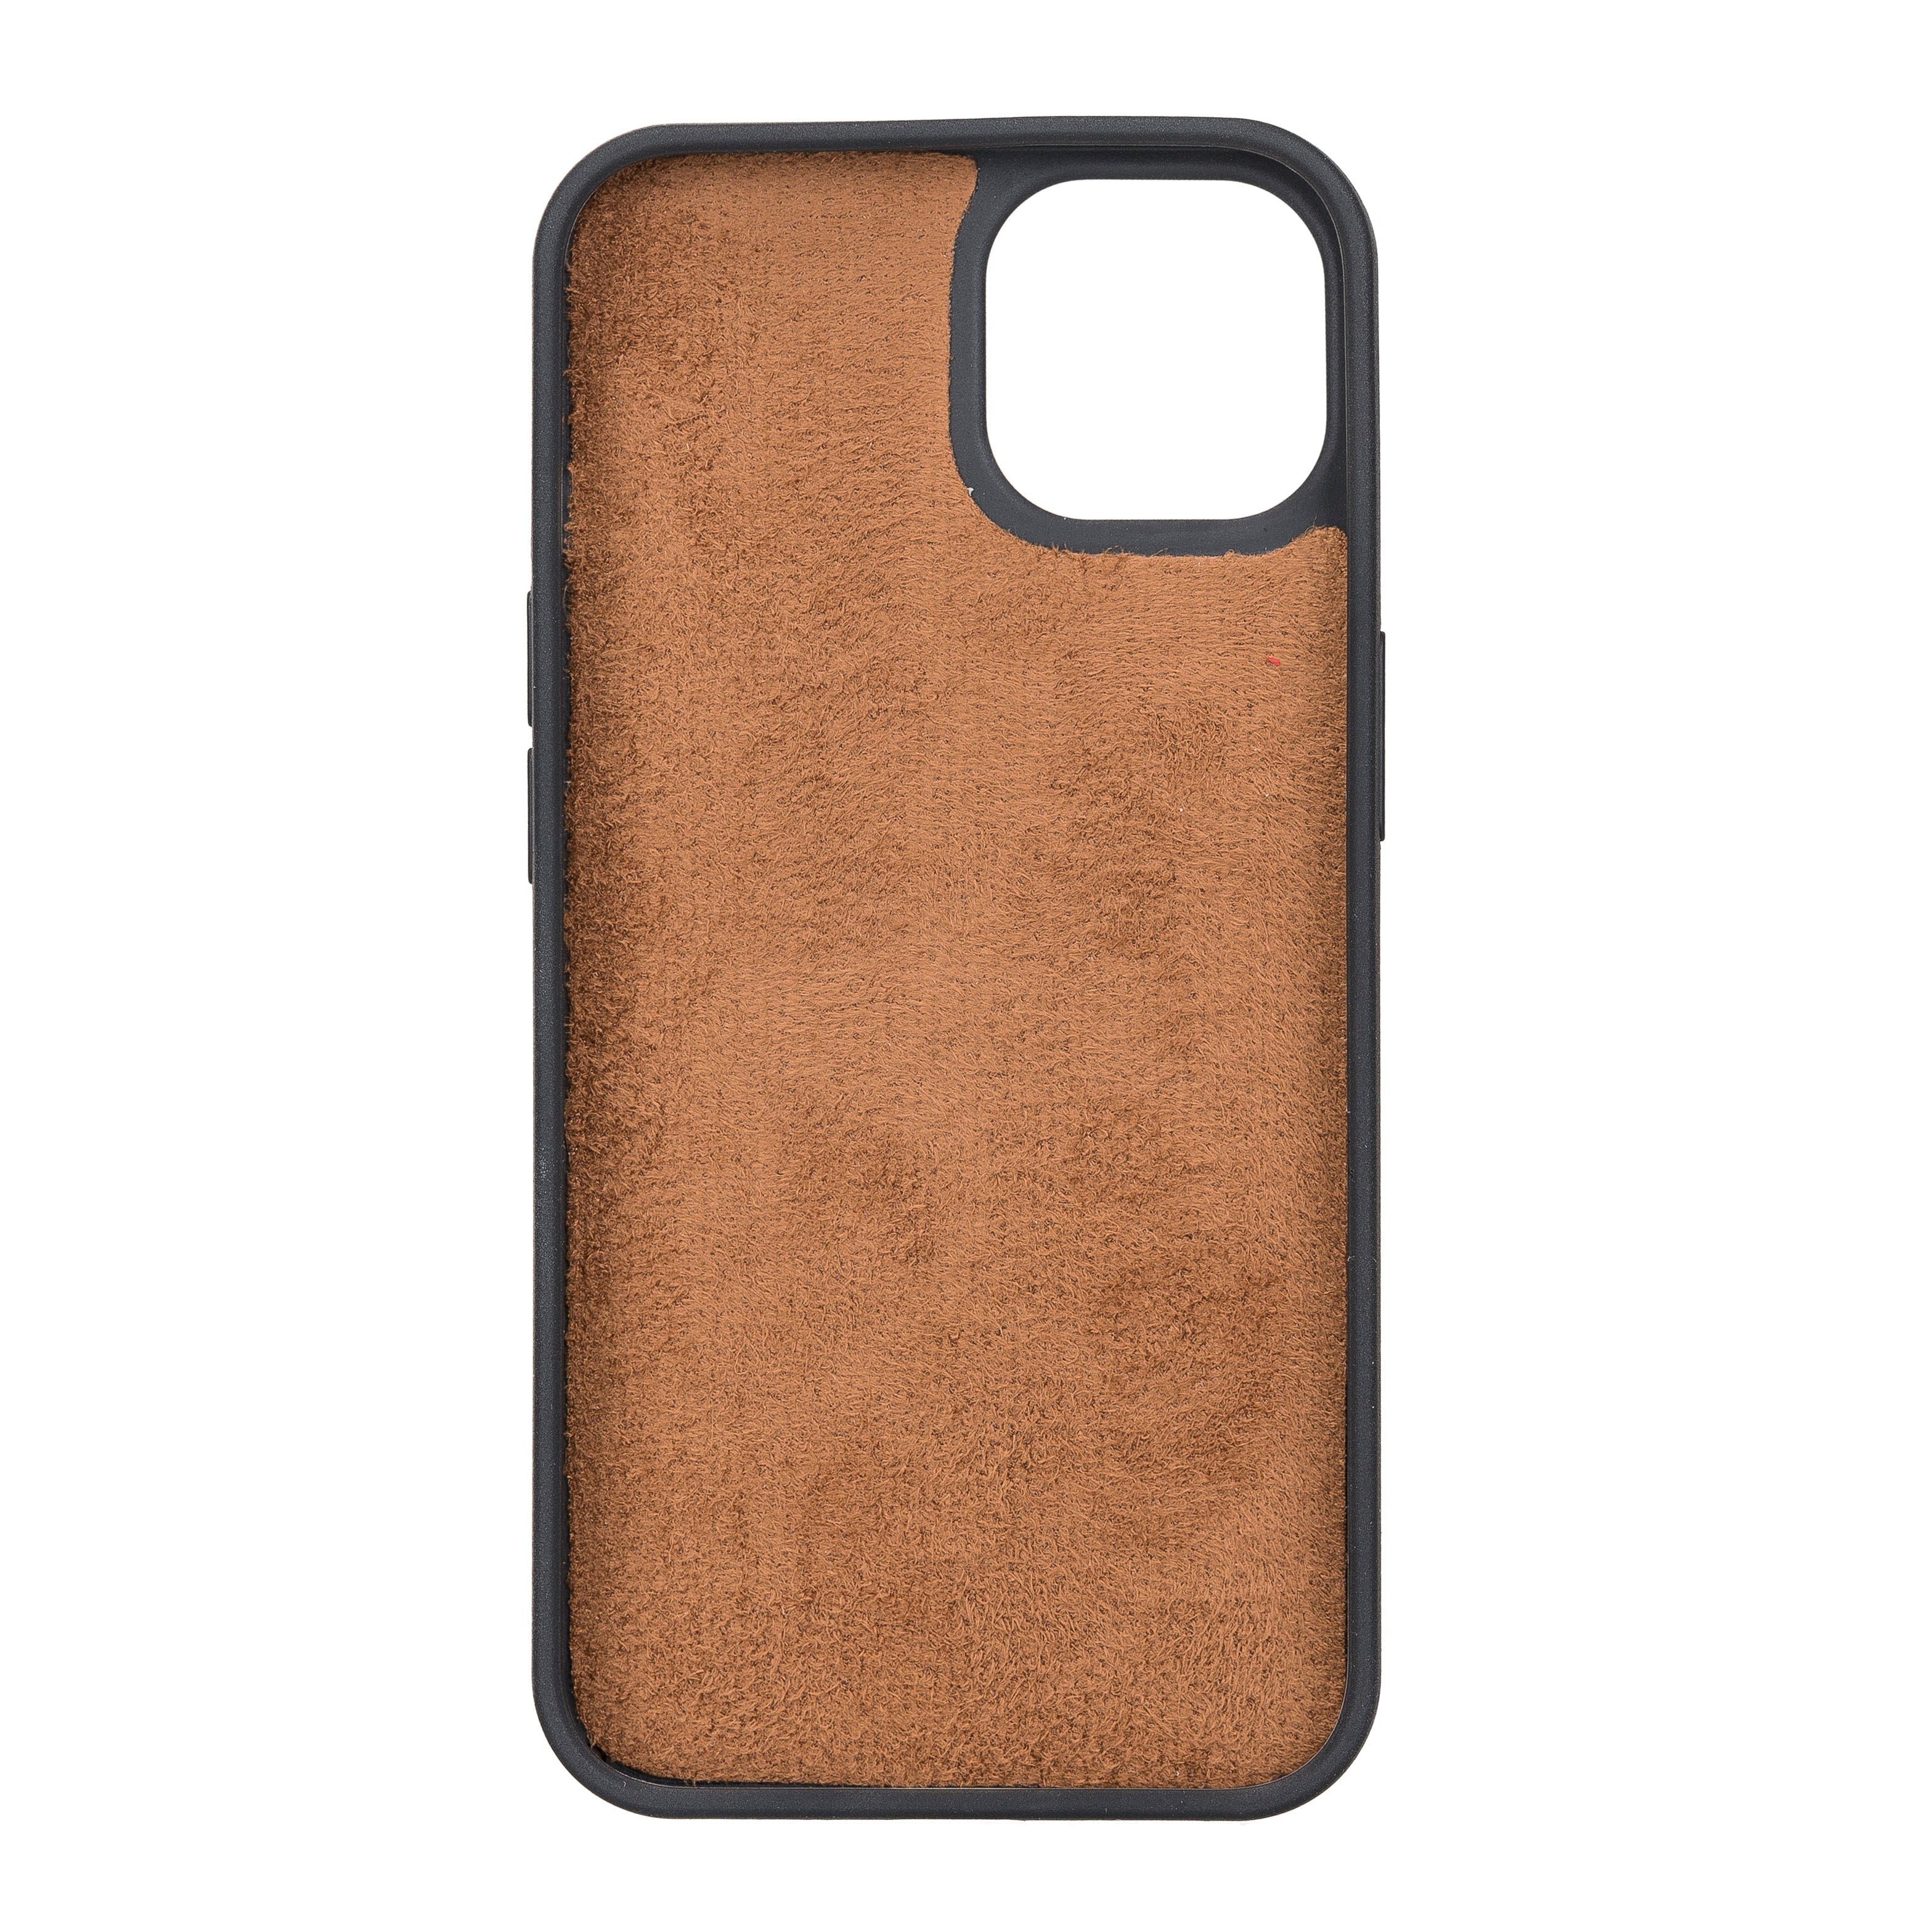 Burnished Tan Leather Snap On Cover Case for iPhone 13 (6.1")